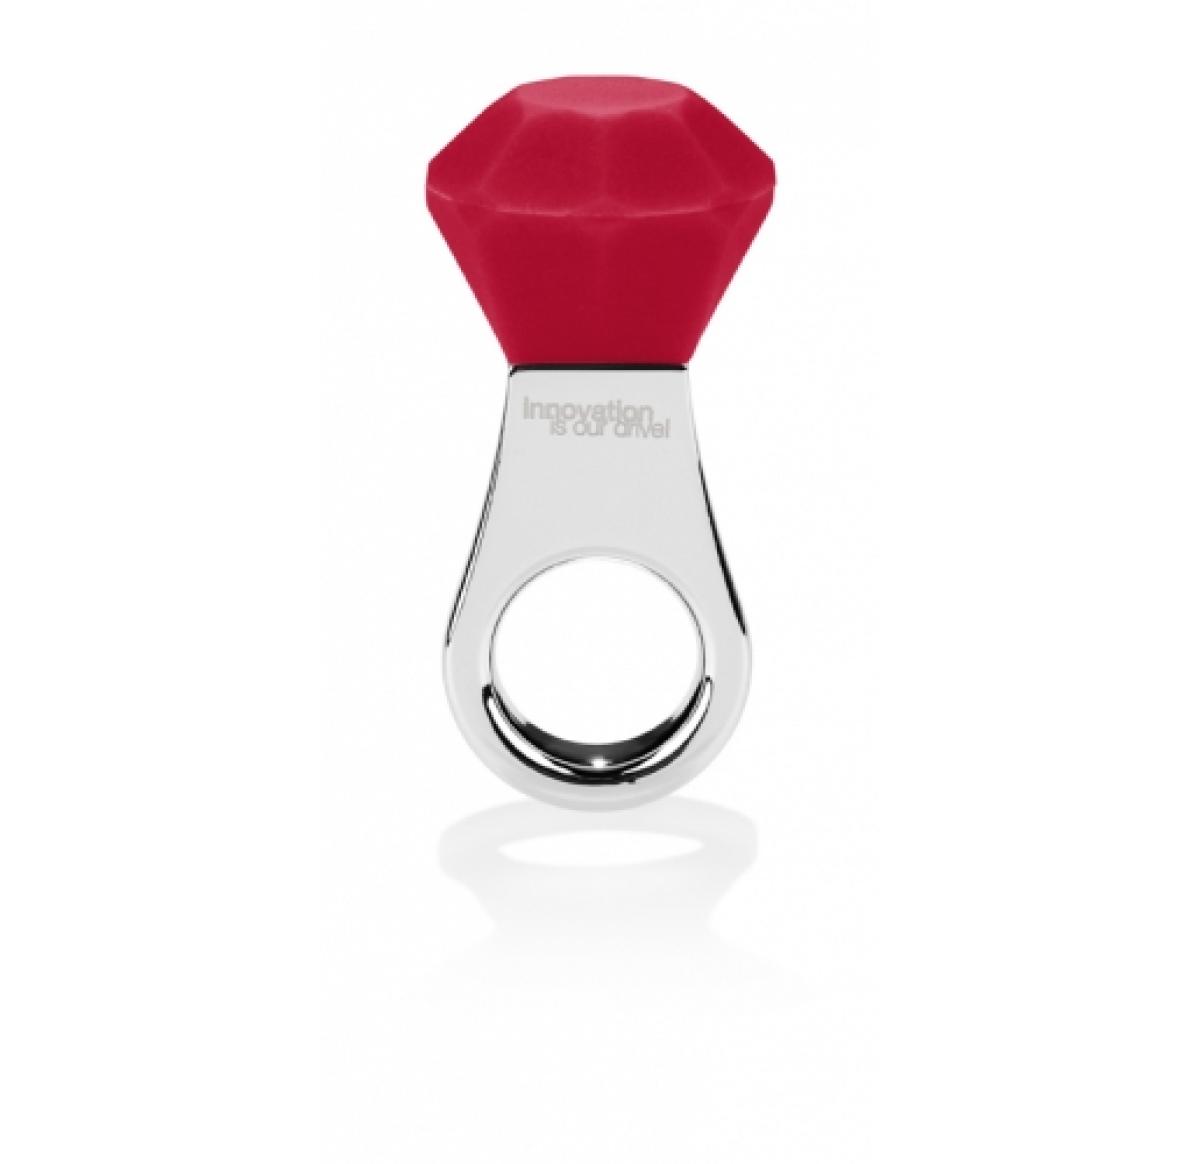 Novelty USB Flashdrive in the shape of a ring